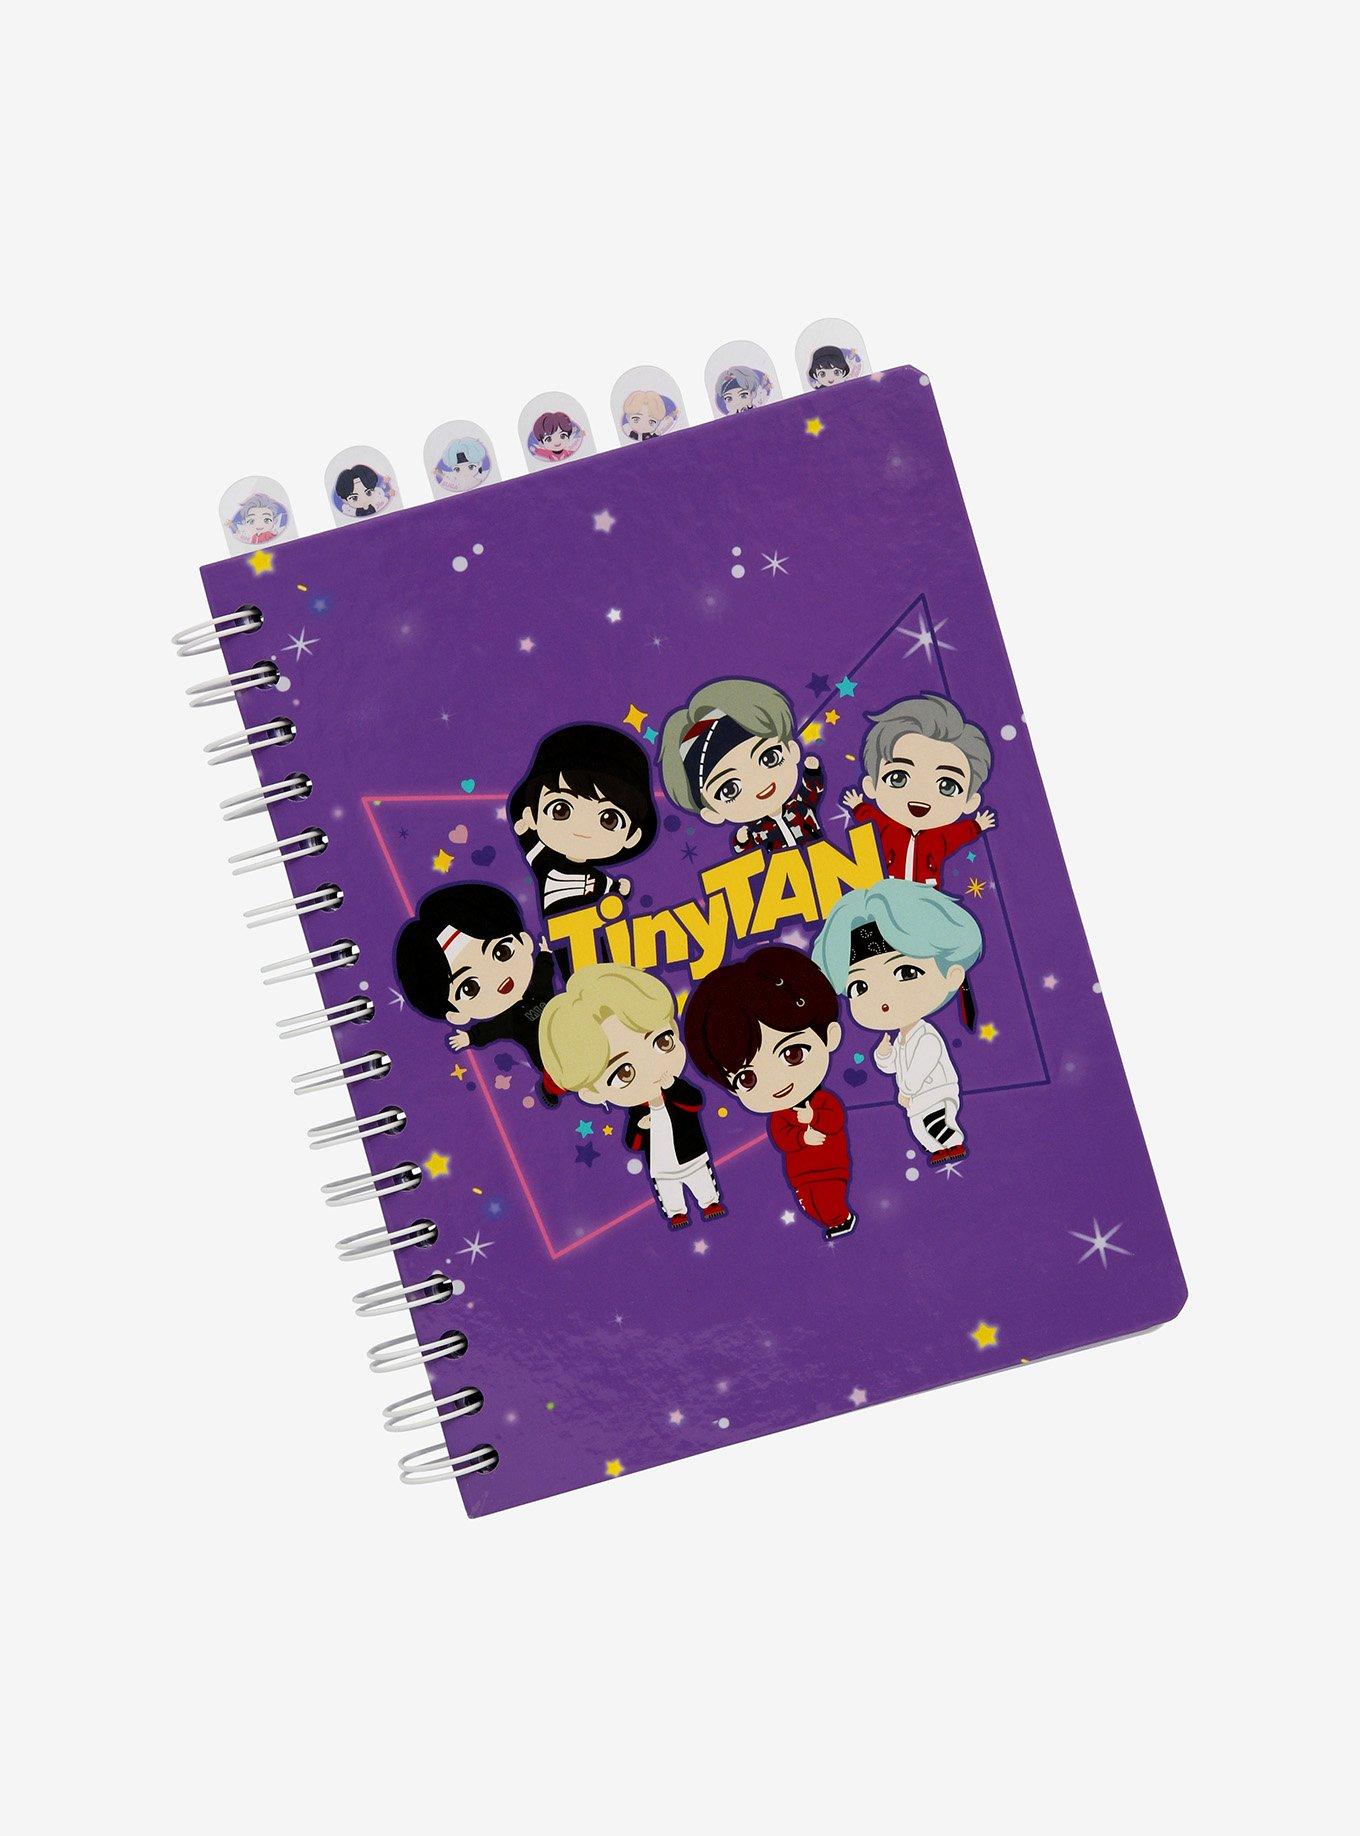 By　Topic　TinyTAN　BTS　Tabbed　Purple　Character　Hot　Journal　Inspired